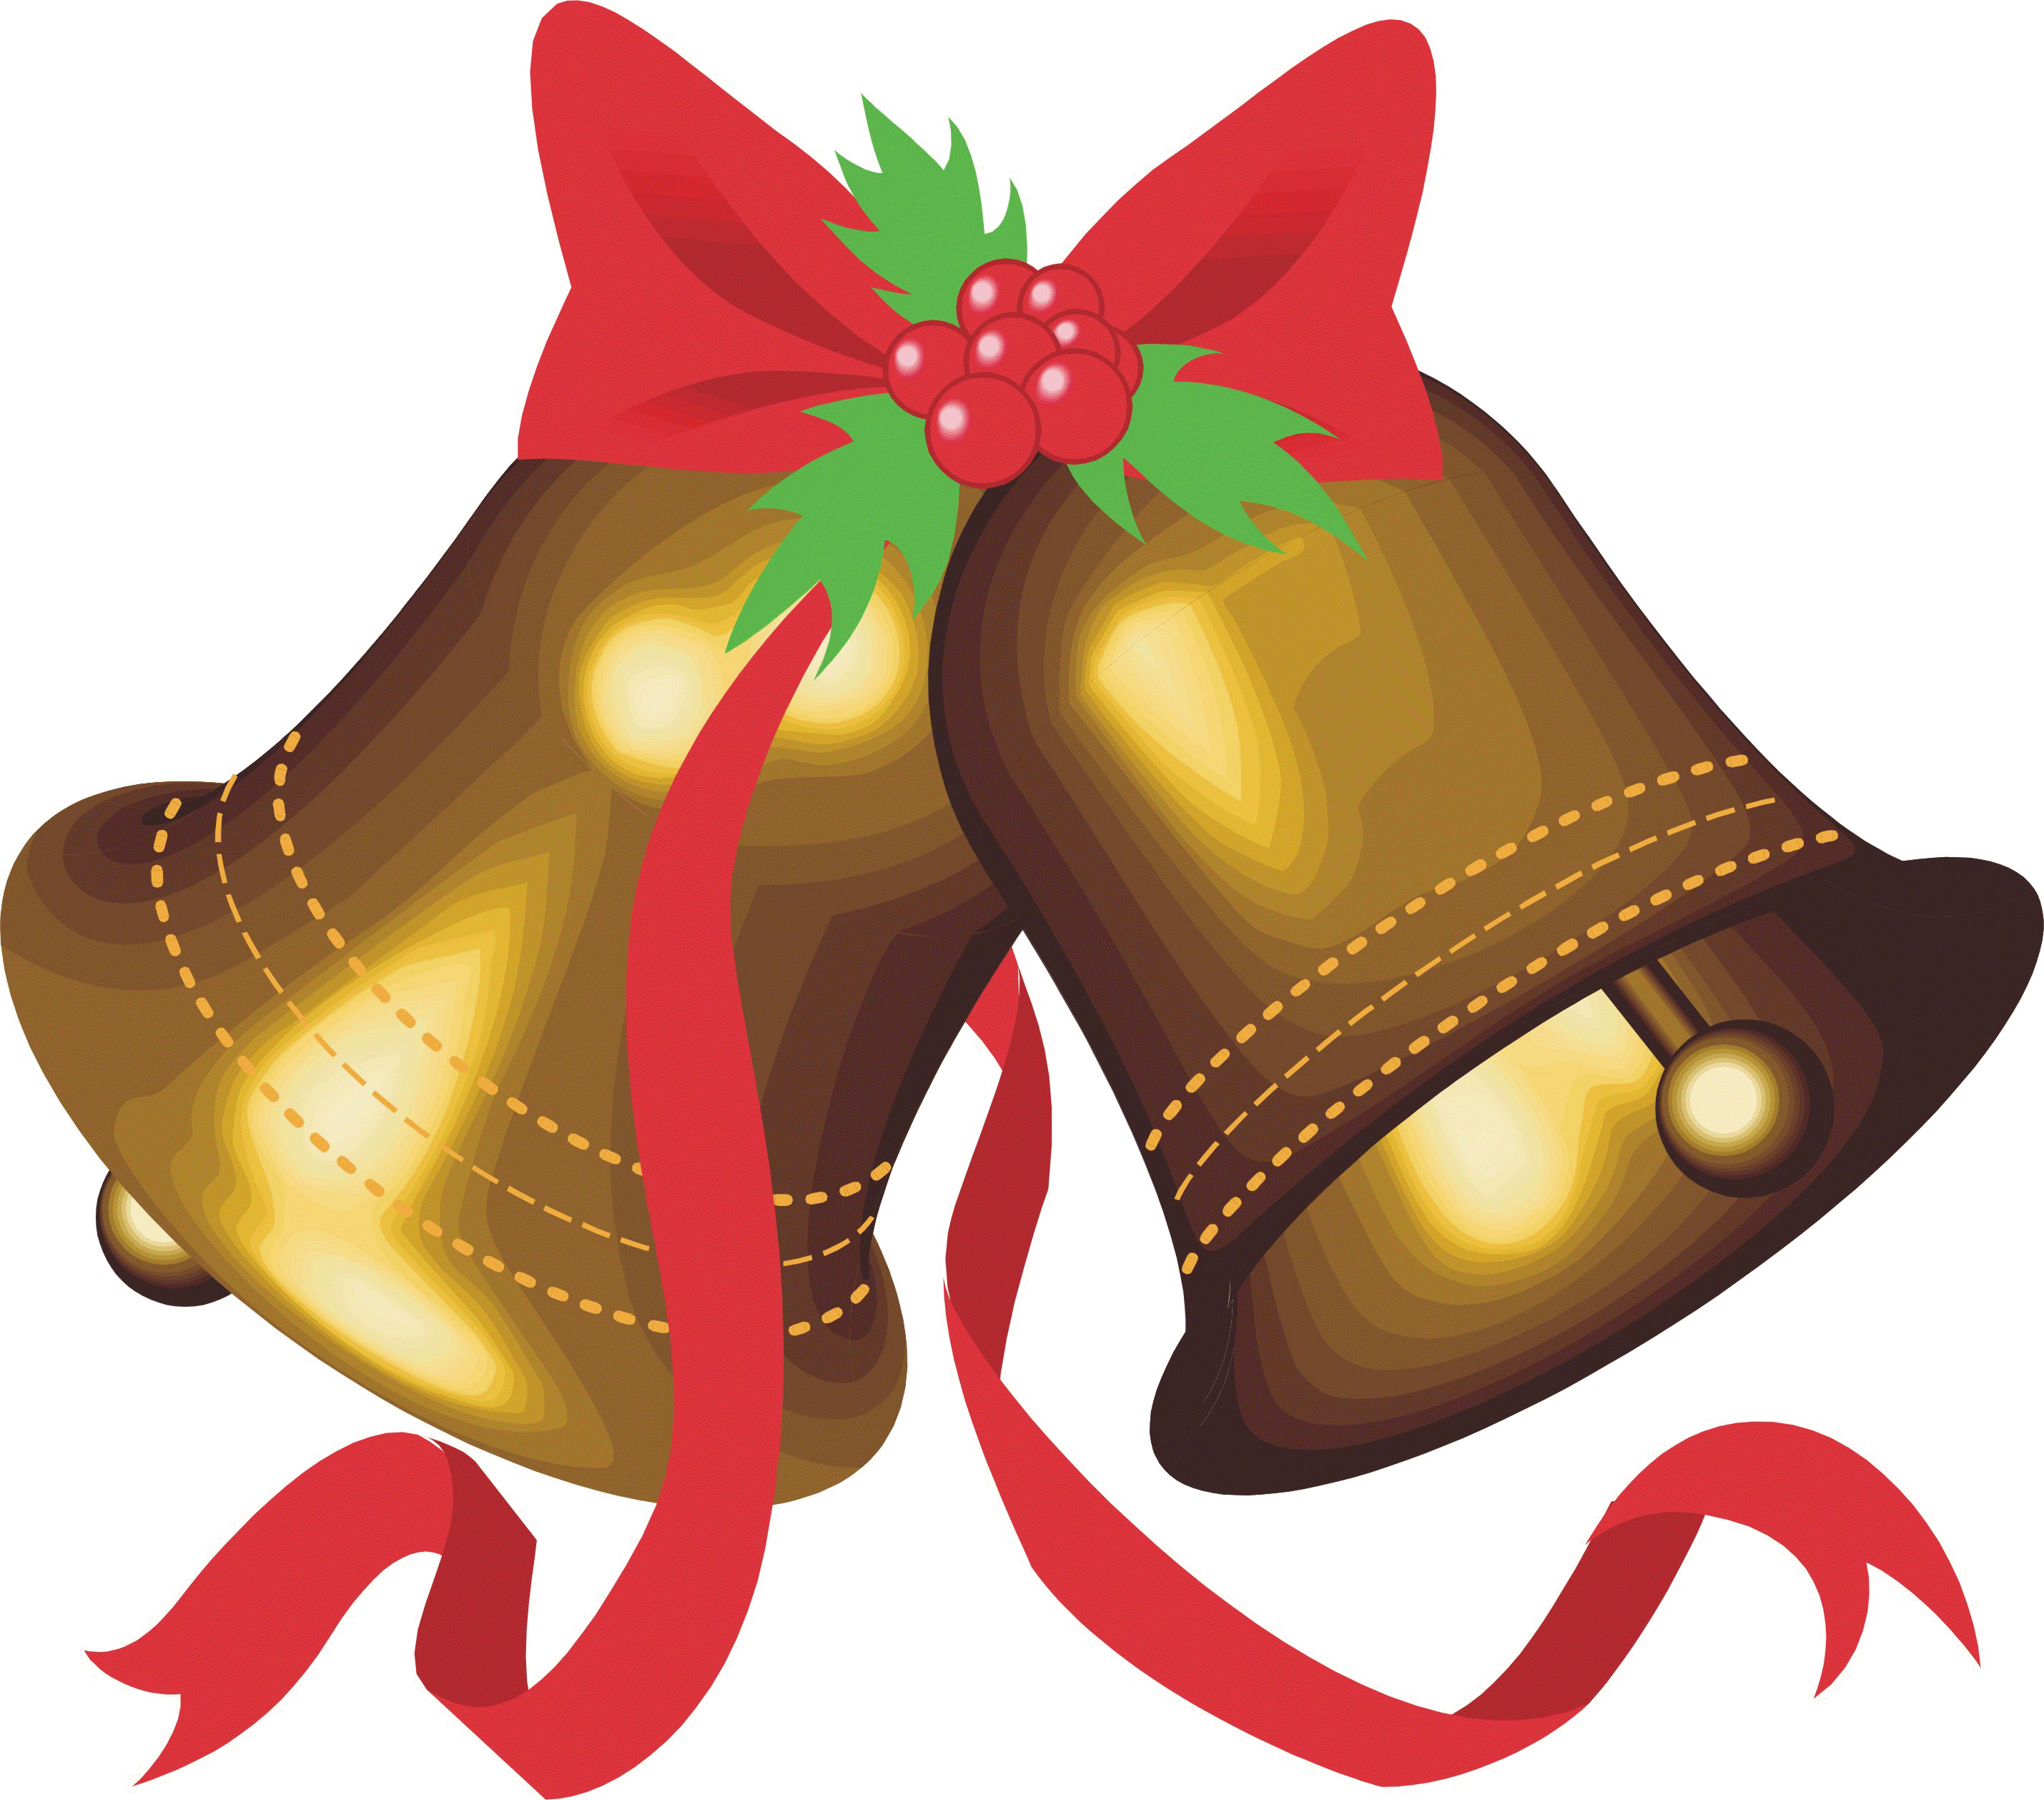 Christmas Bells Clip Art Images | House of Crafts